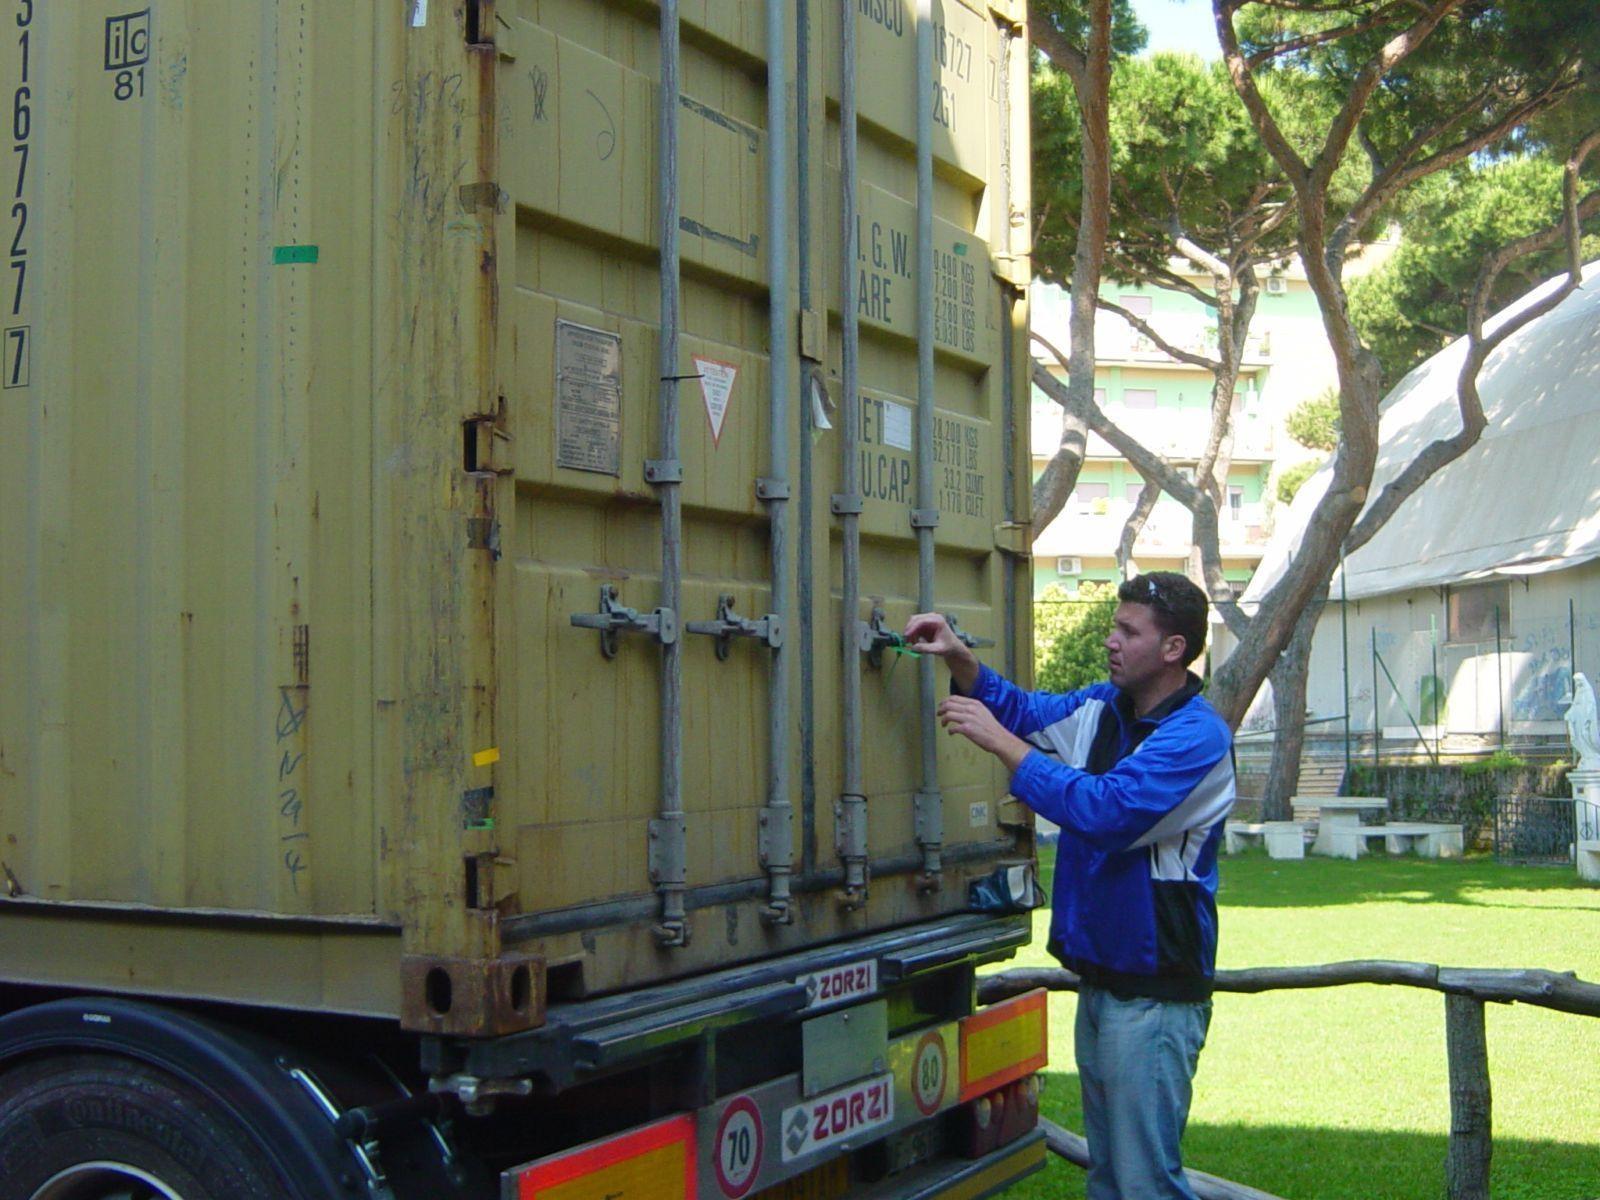 container_2012-missione_020.jpg